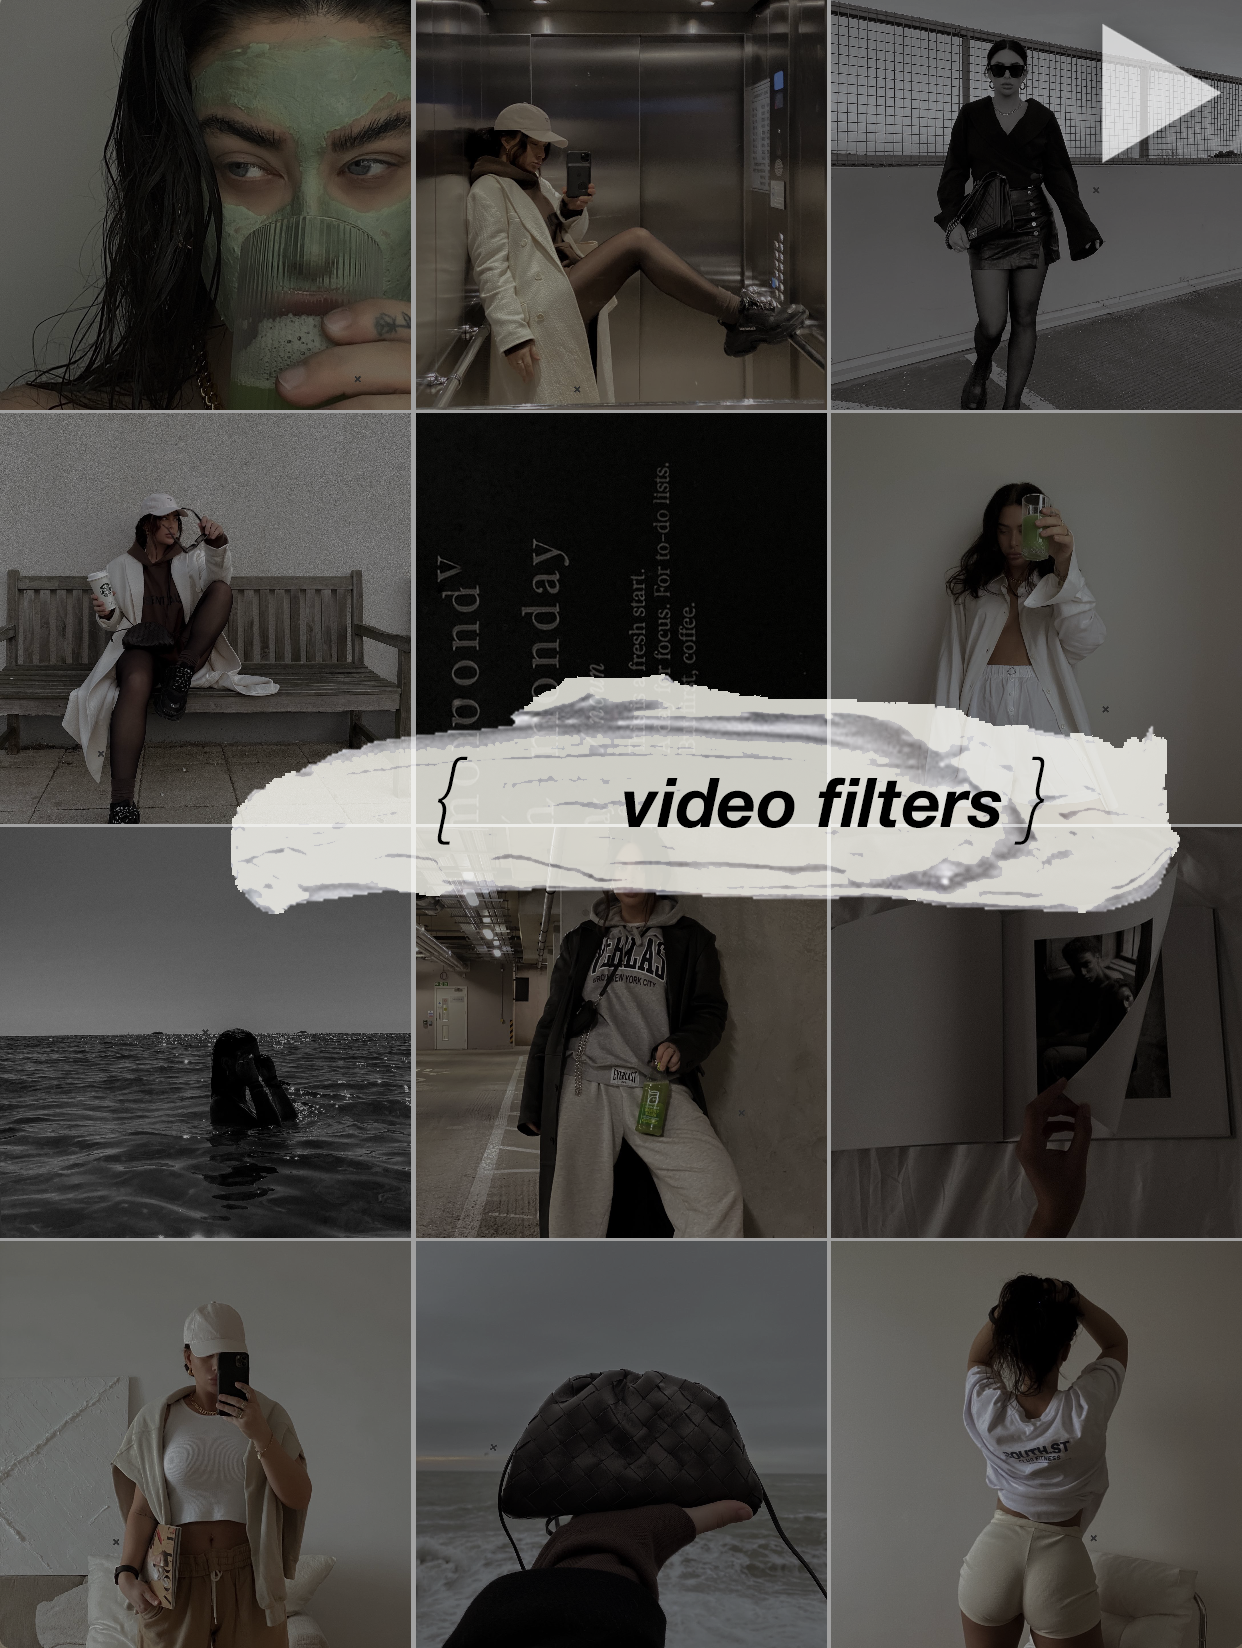 VIDEO FILTERS